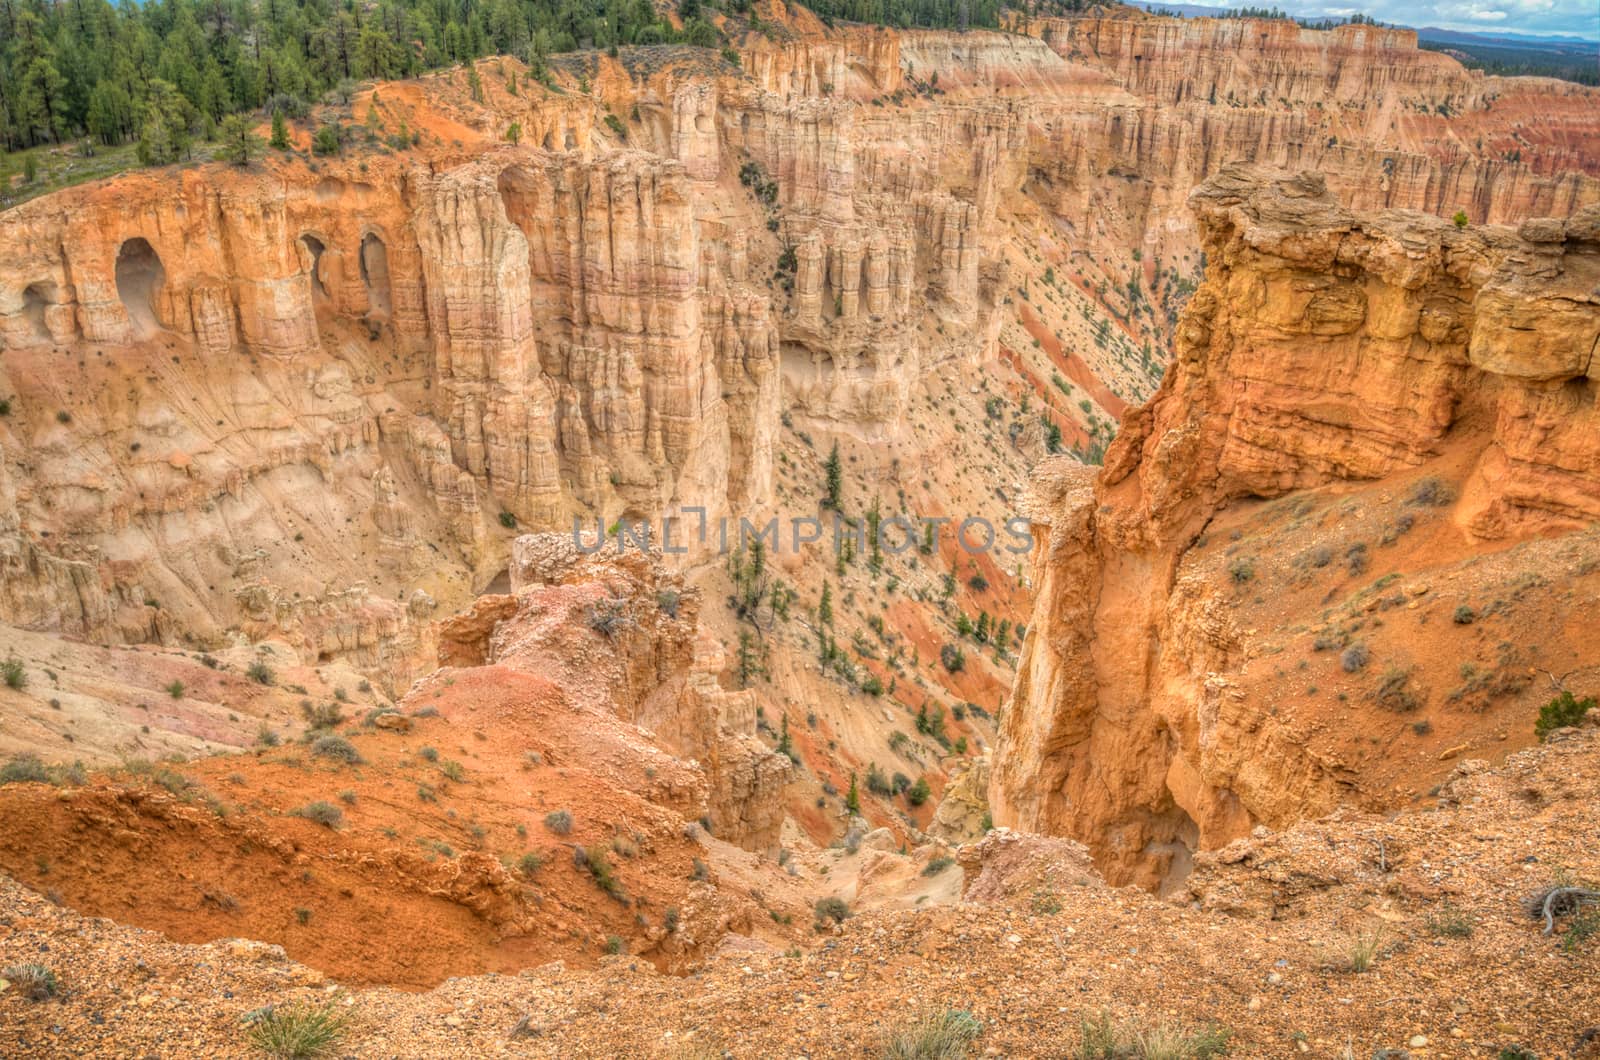 Bryce Canyon valley amphitheater 2013 by weltreisendertj